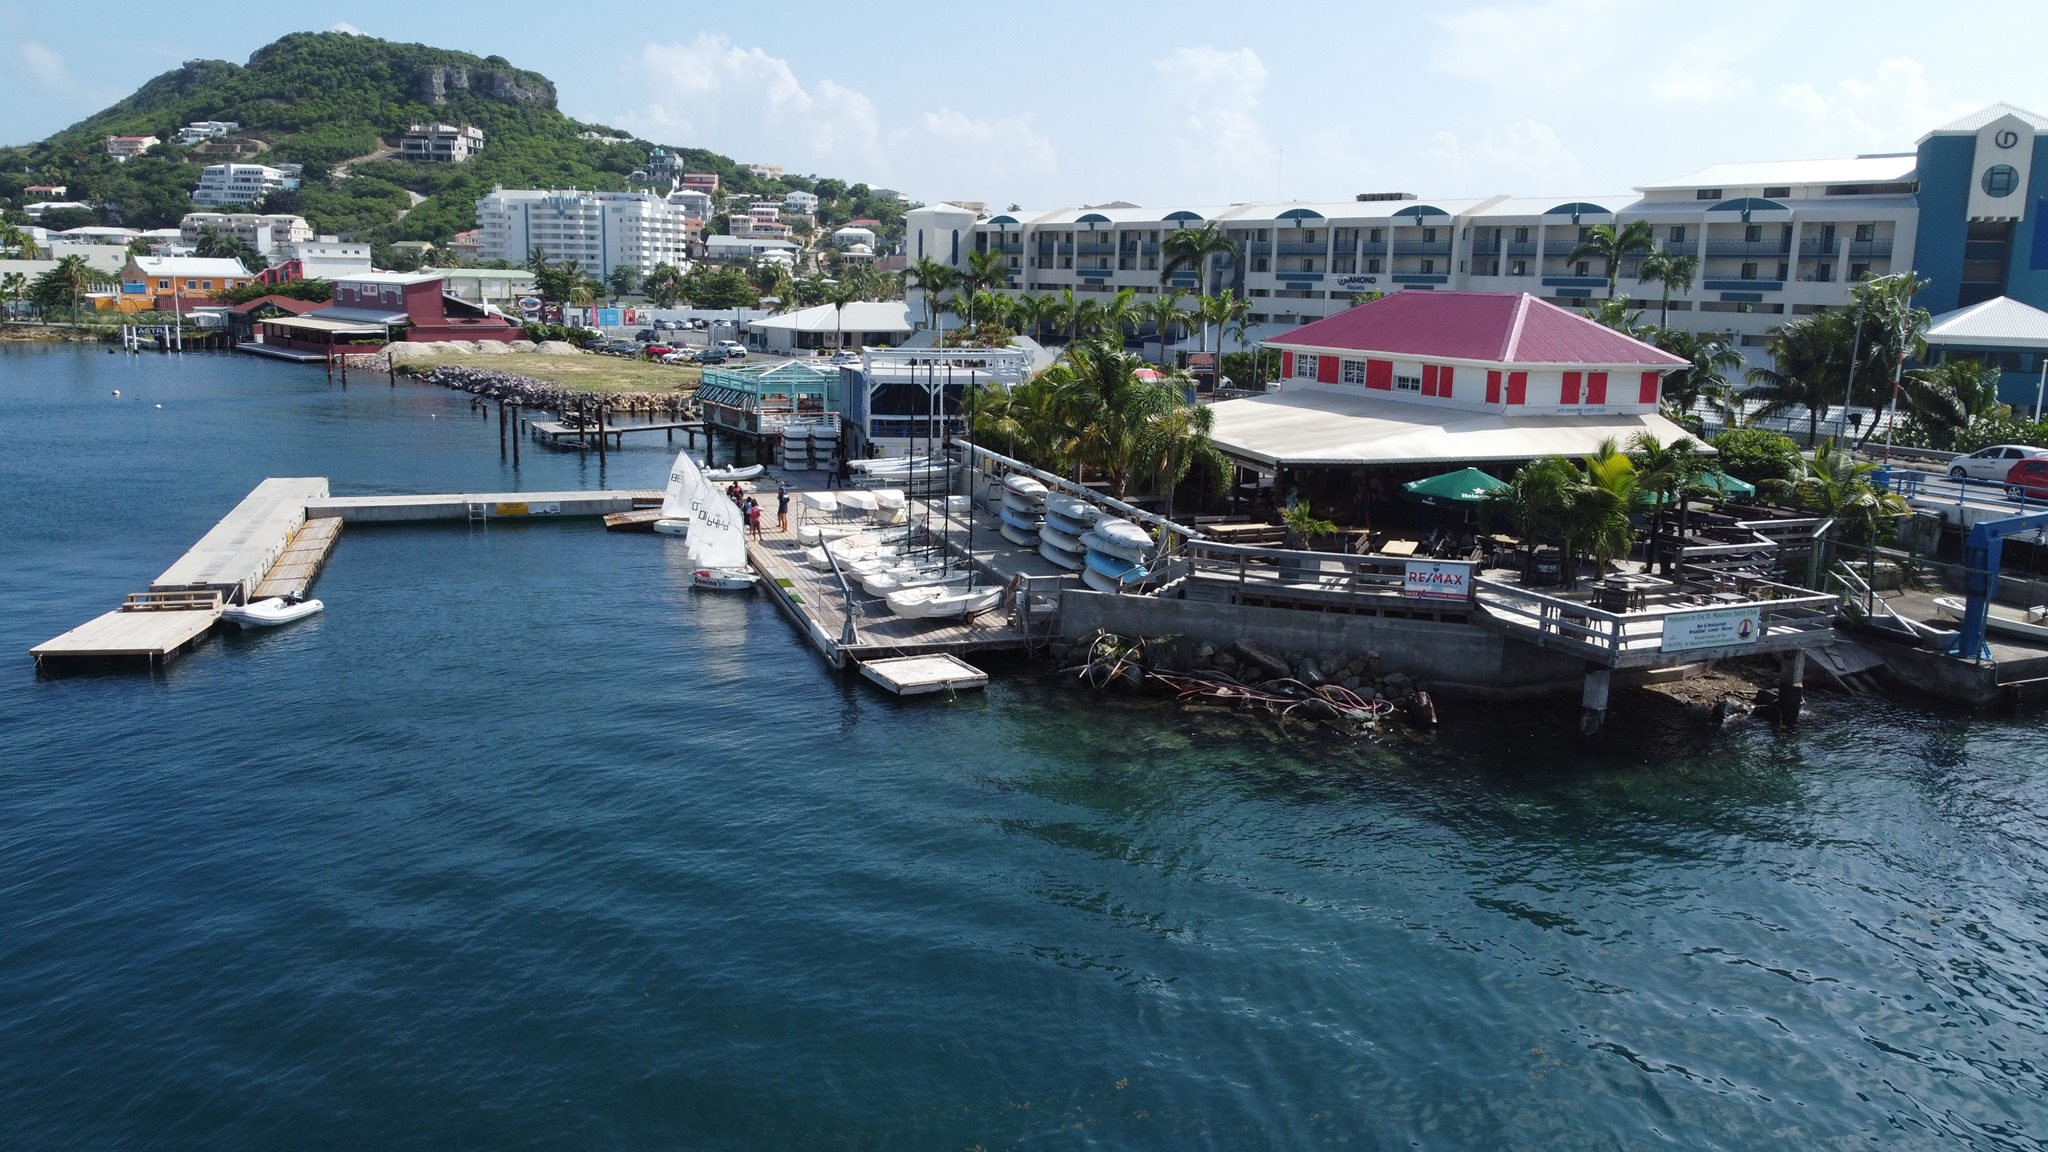 The Sint Maarten Yacht Club from a side perspective where you can see the Club and a little bit of the surrounding Simpson Bay area